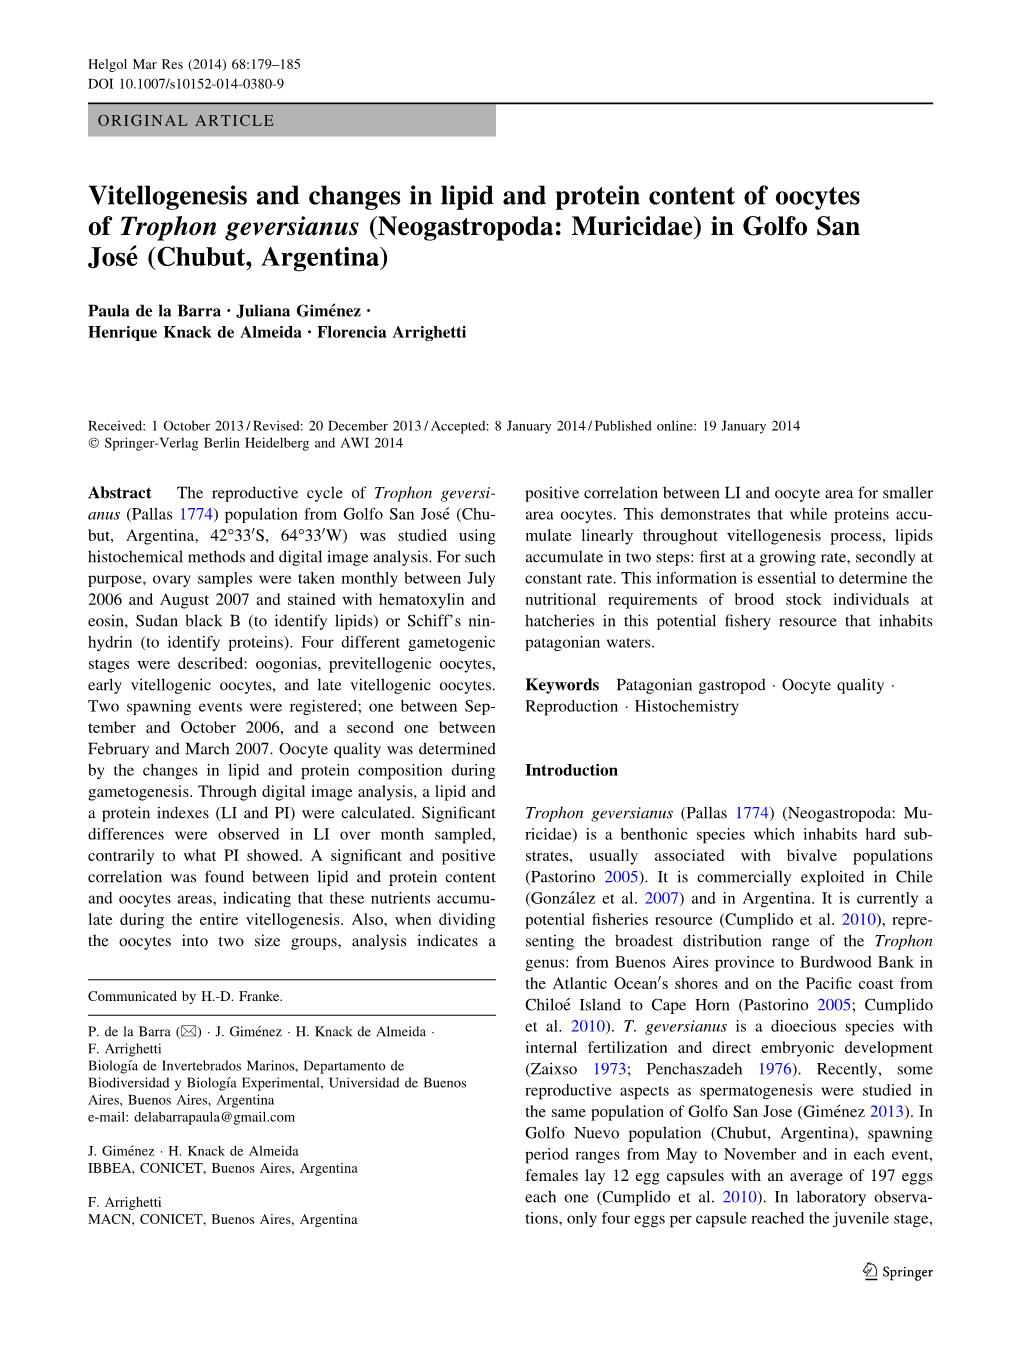 Vitellogenesis and Changes in Lipid and Protein Content of Oocytes of Trophon Geversianus (Neogastropoda: Muricidae) in Golfo San Jose´ (Chubut, Argentina)